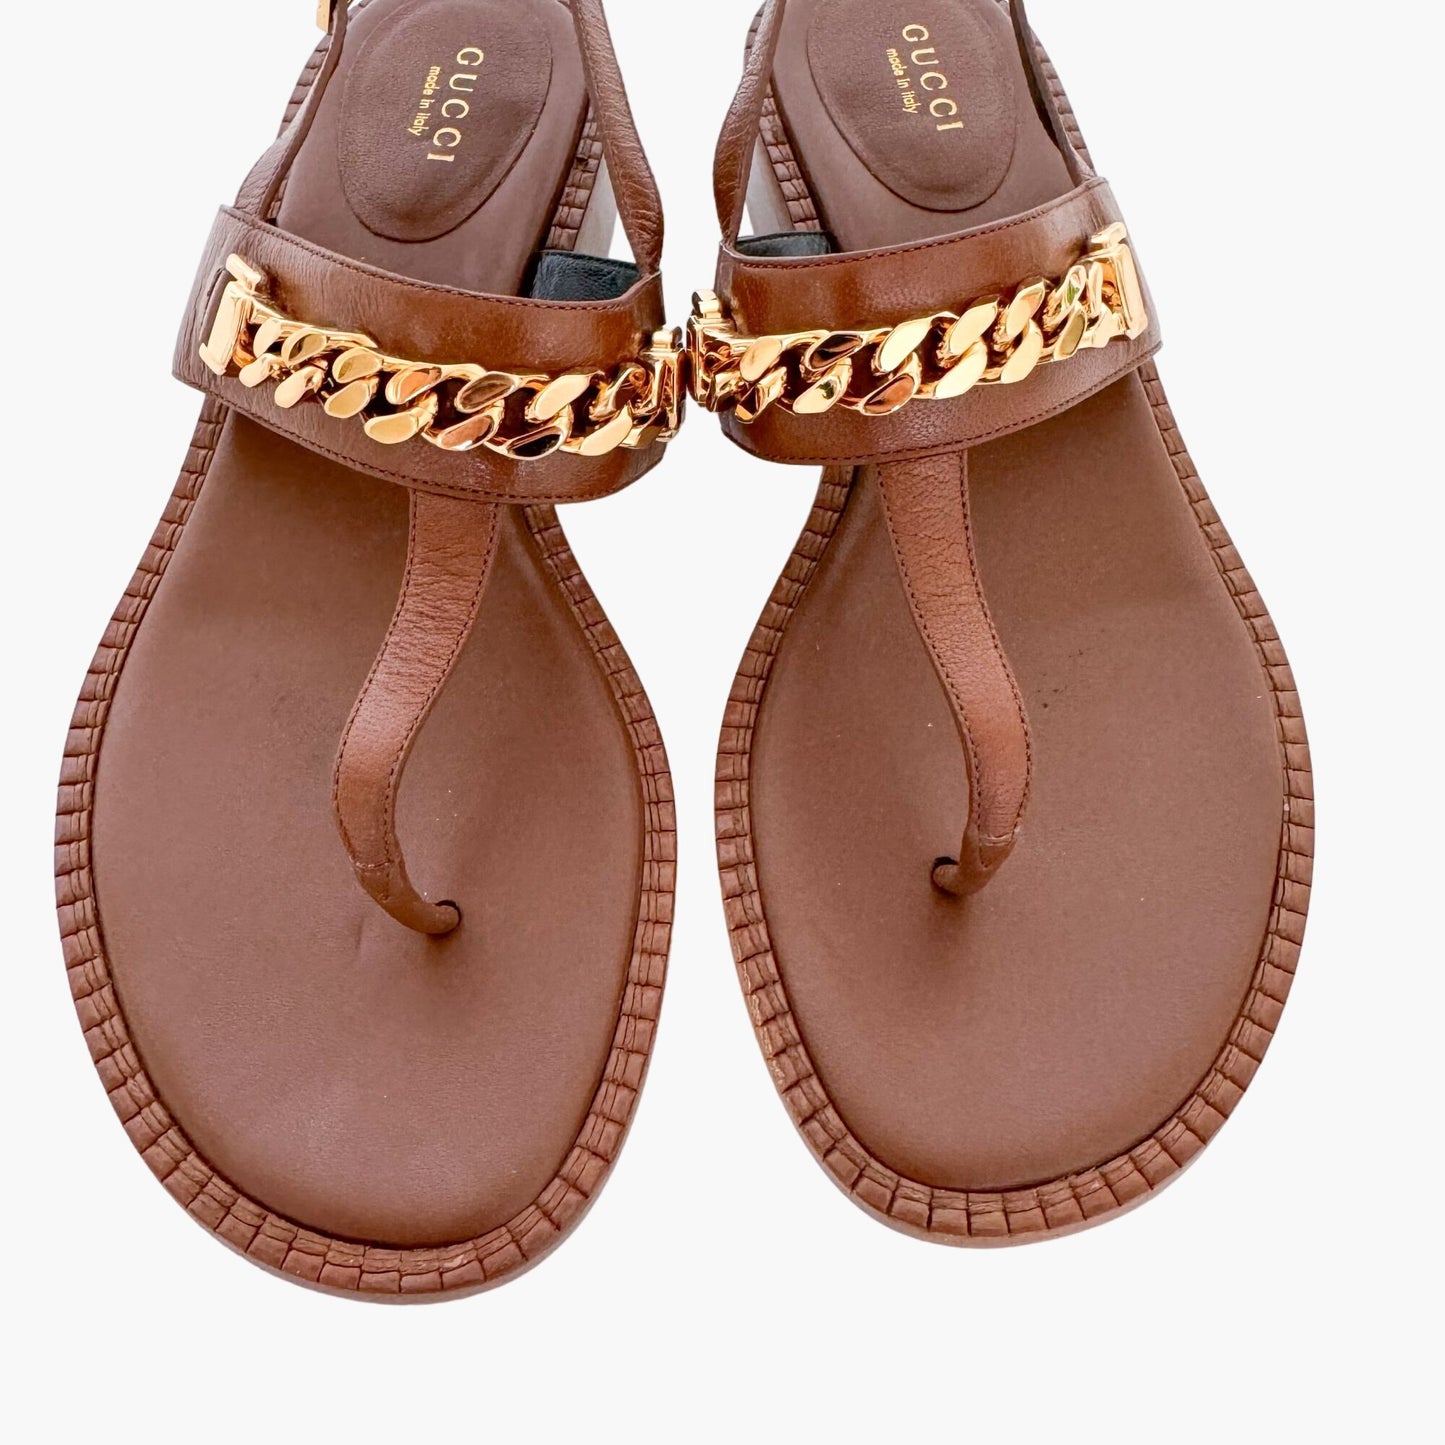 Gucci Sylvie T-Strap Chain Sandals in Brown Leather Size 37.5